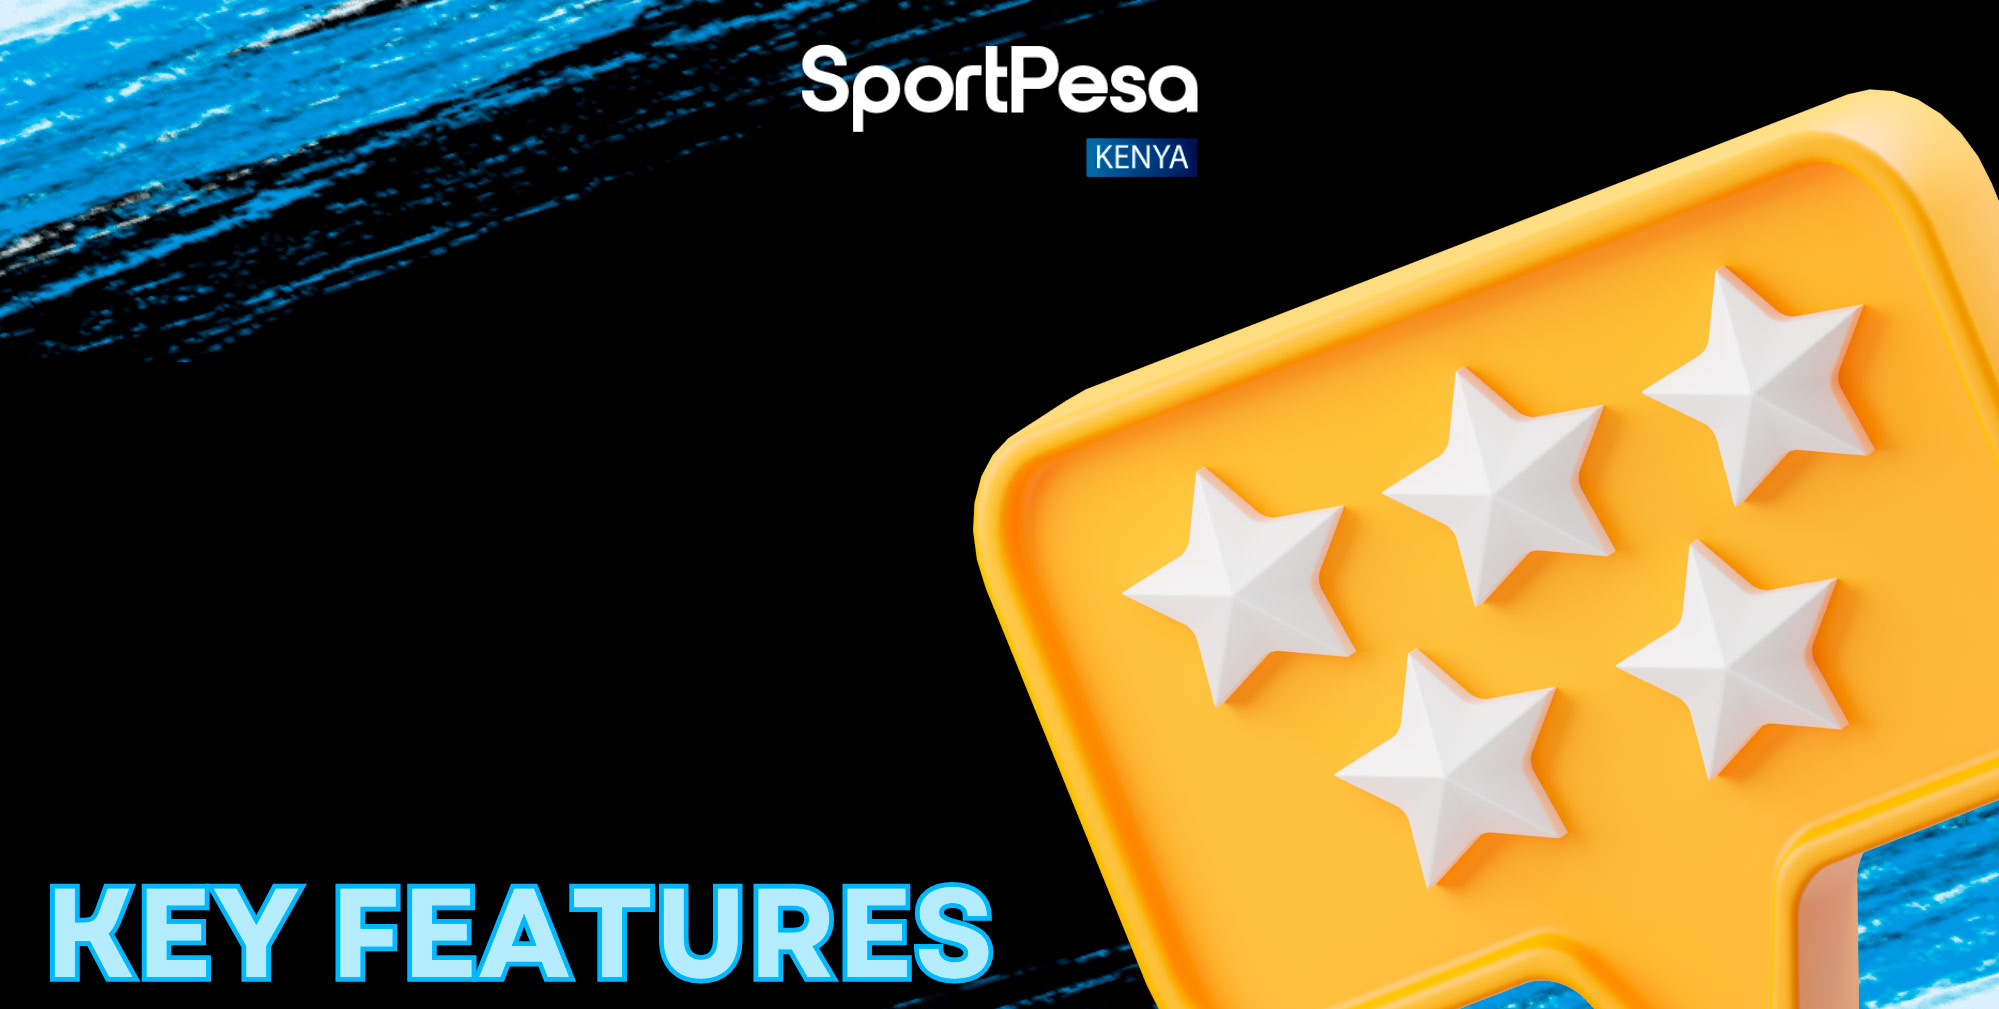 The Sportpesa app has a number of features